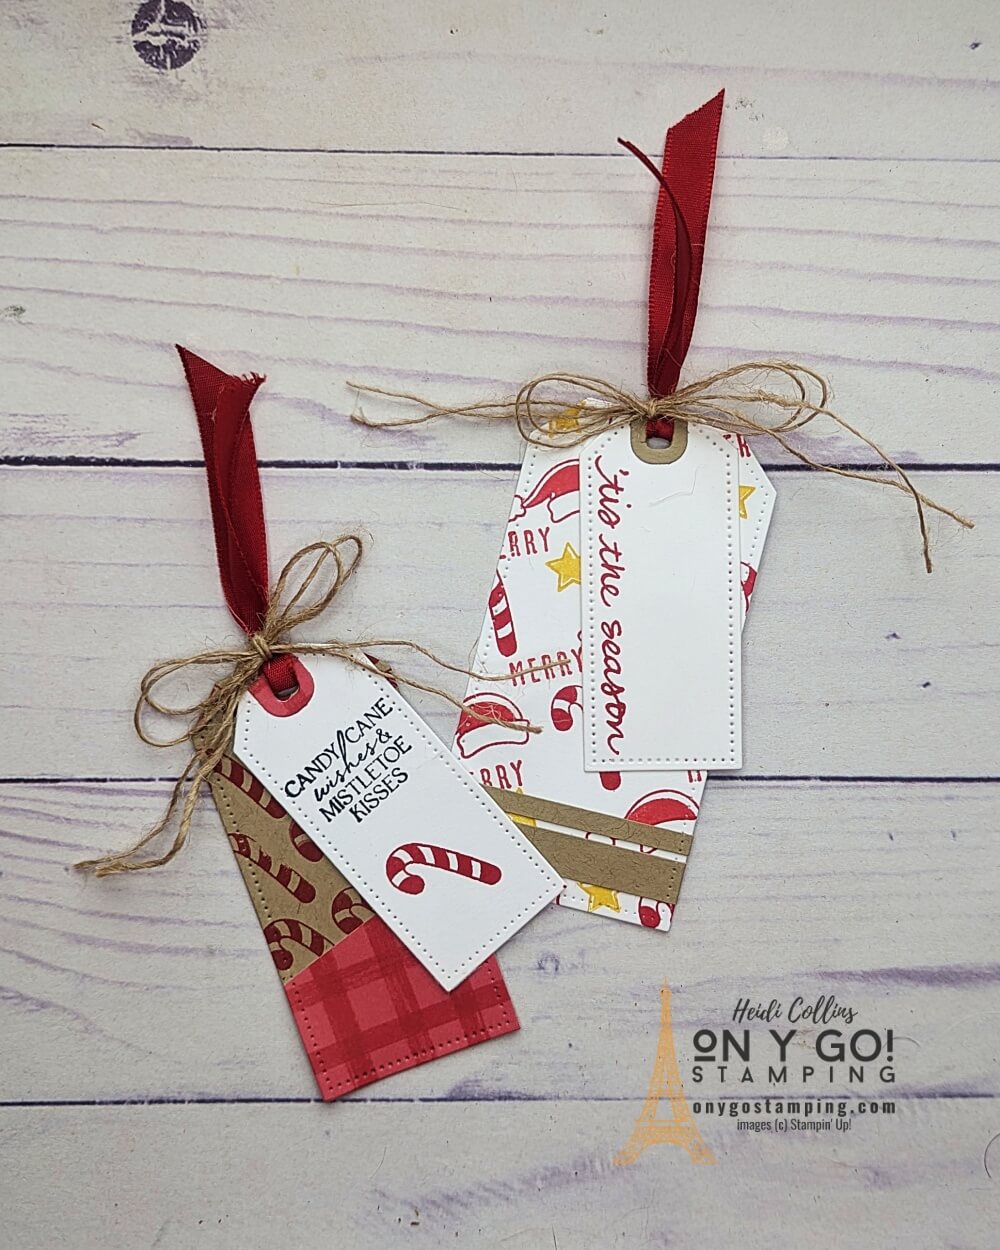 Handmade gift tags for Christmas using the Jingle Jingle Jingle stamp set from Stampin' Up! Use the Tailor Made Tags dies and scraps of patterned paper to make fun handmade gift tags.